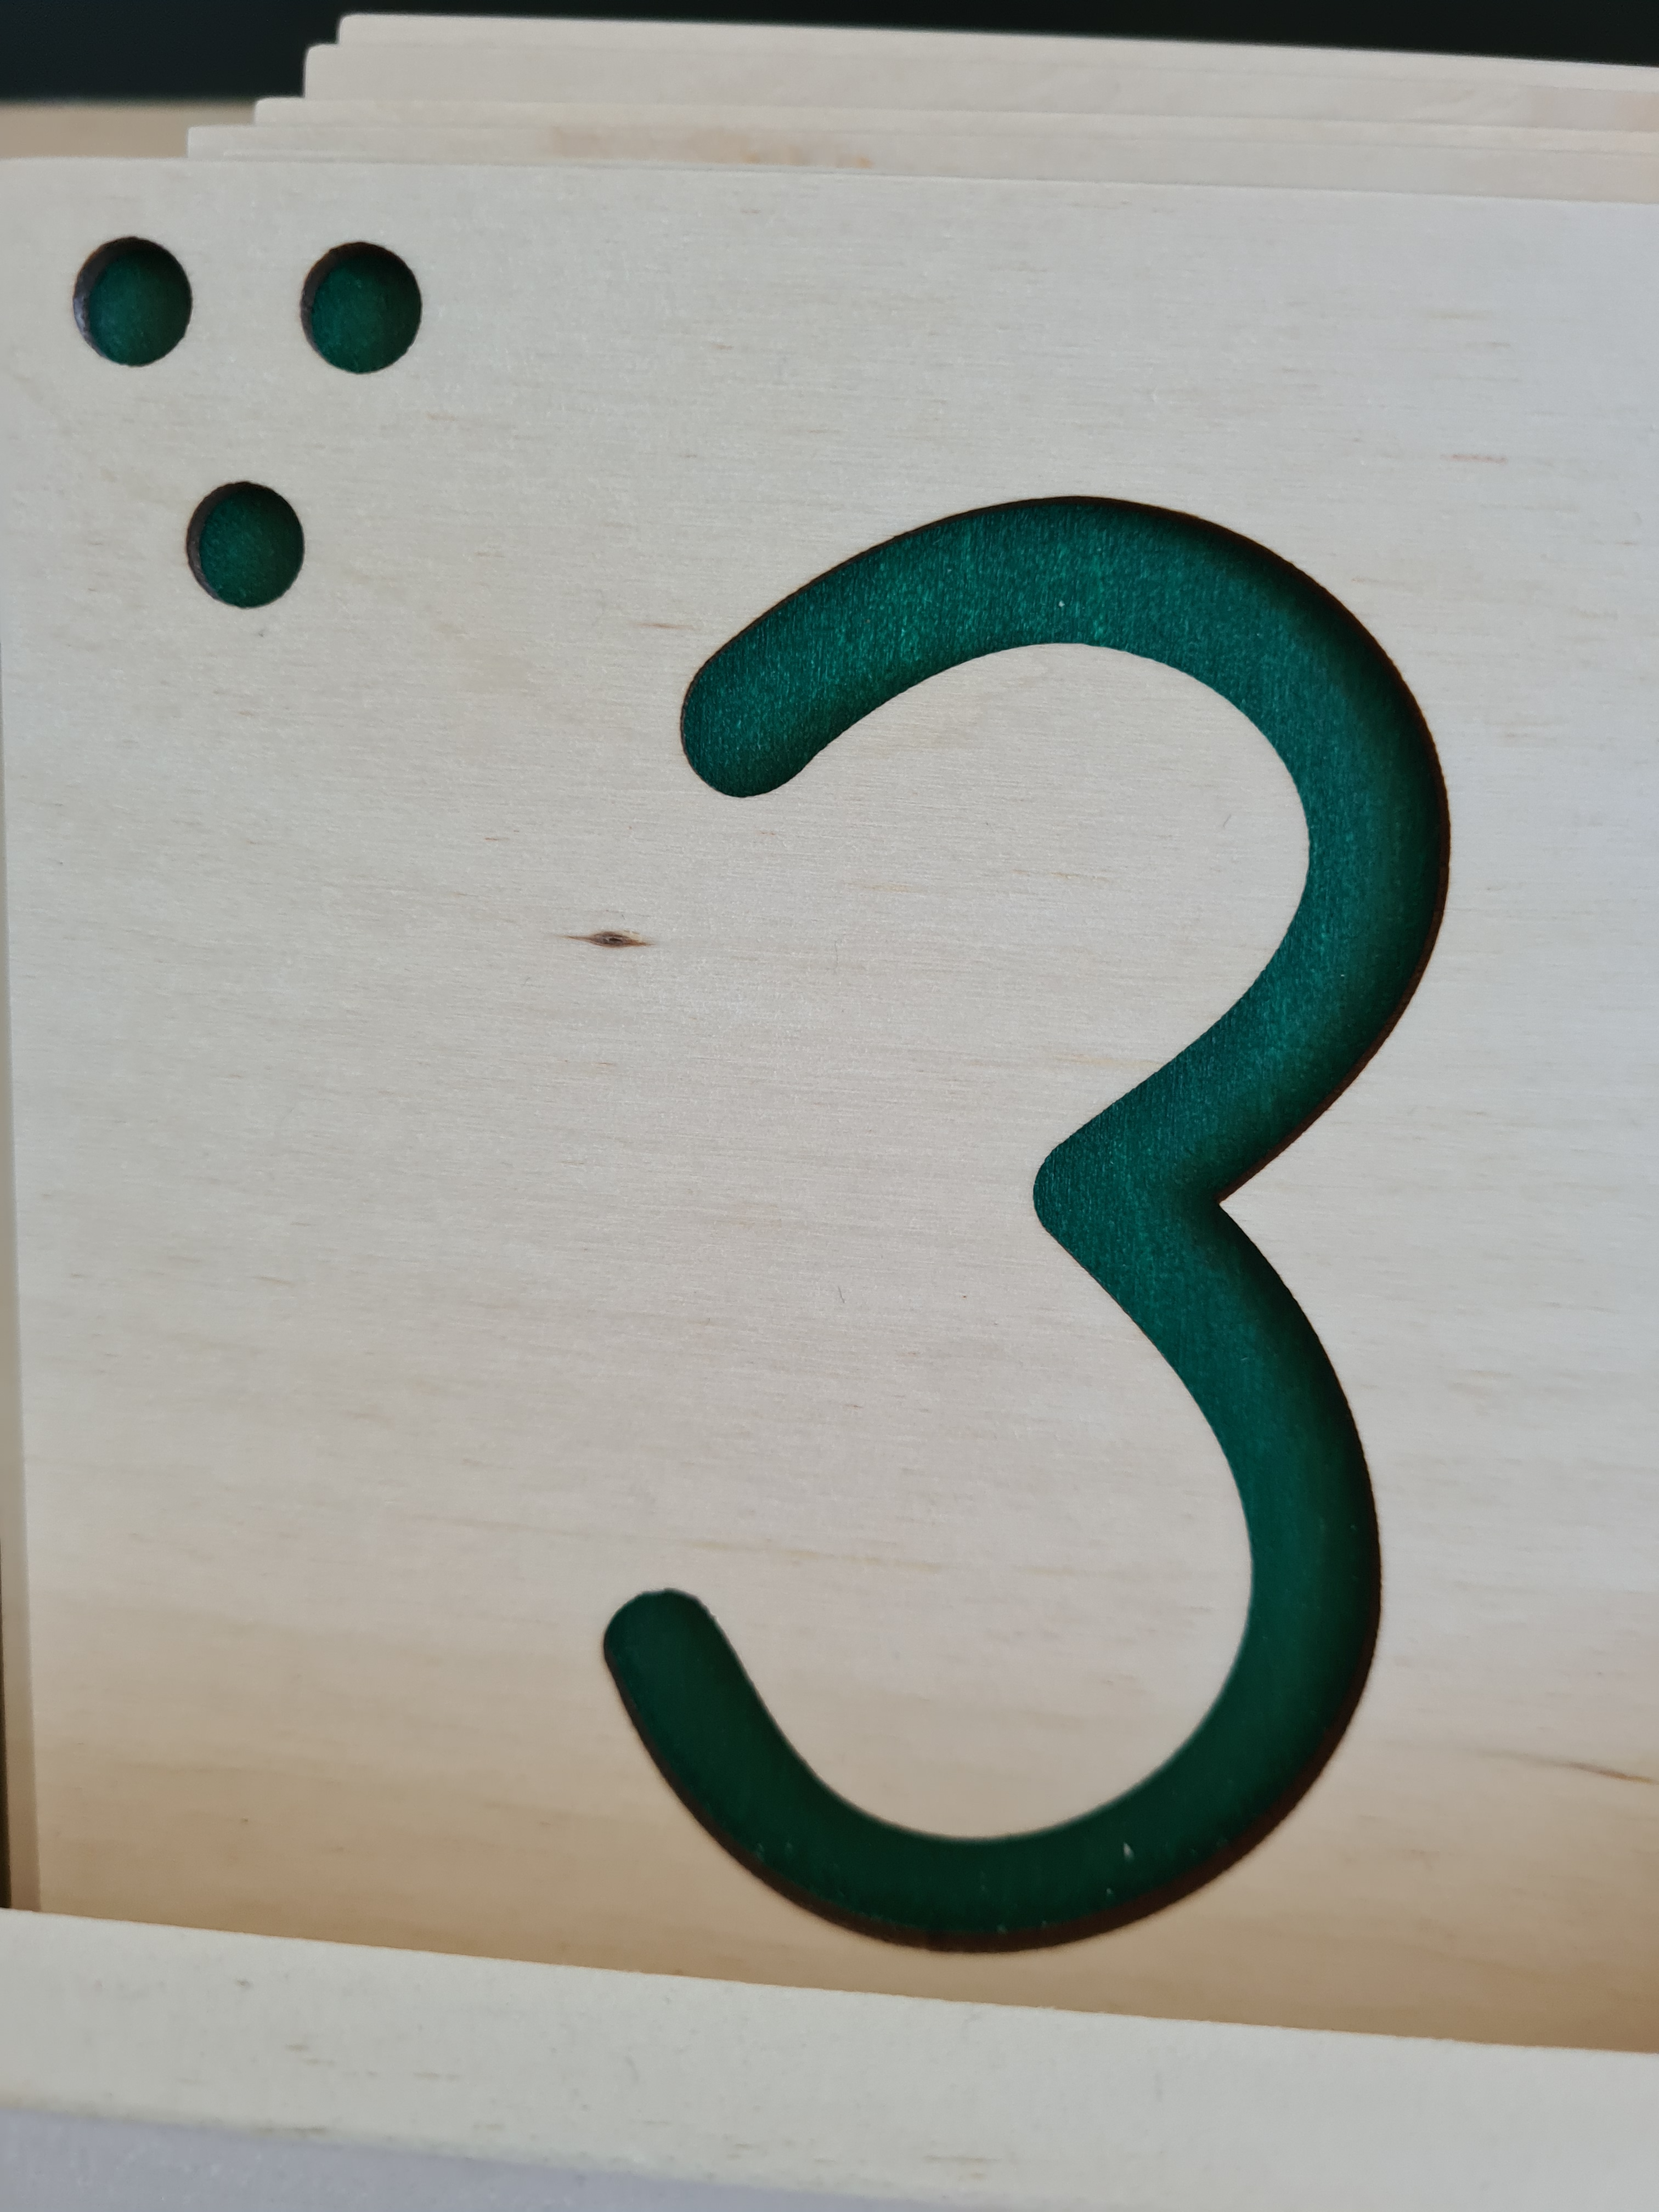 Wooden Movable  Numbers with Pegs.